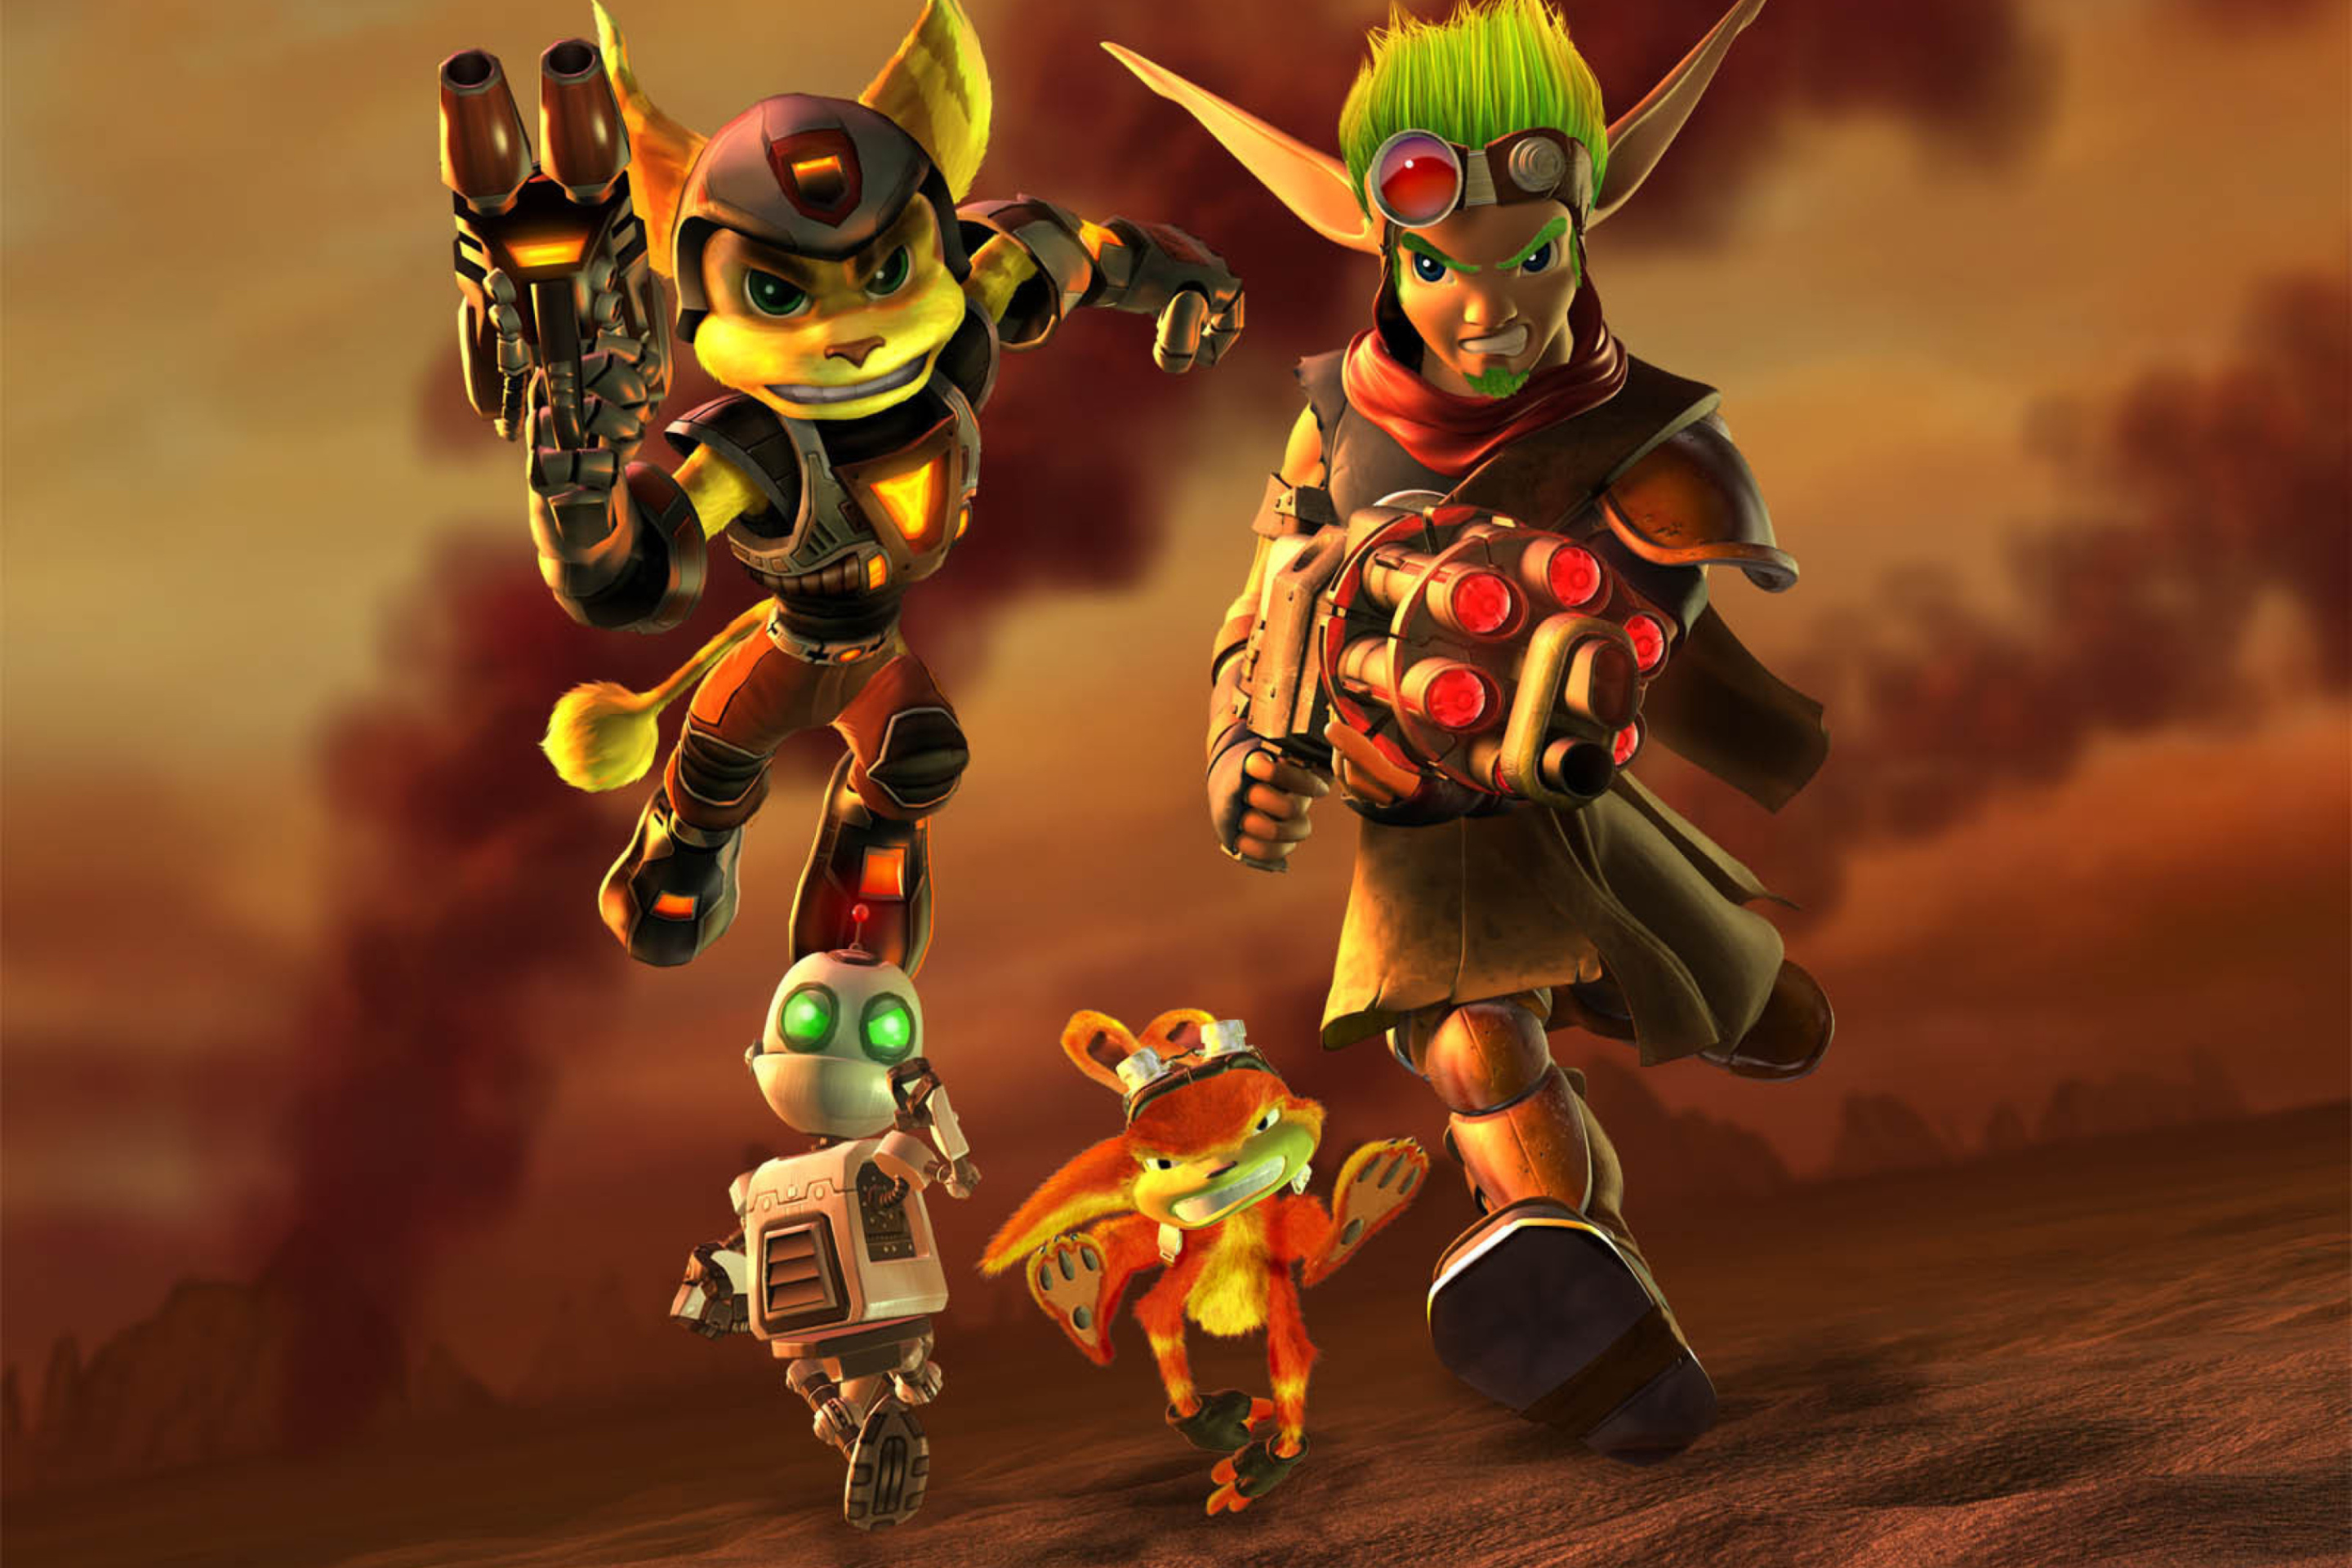 Das Jak and Daxter - Ratchet and Clank Wallpaper 2880x1920